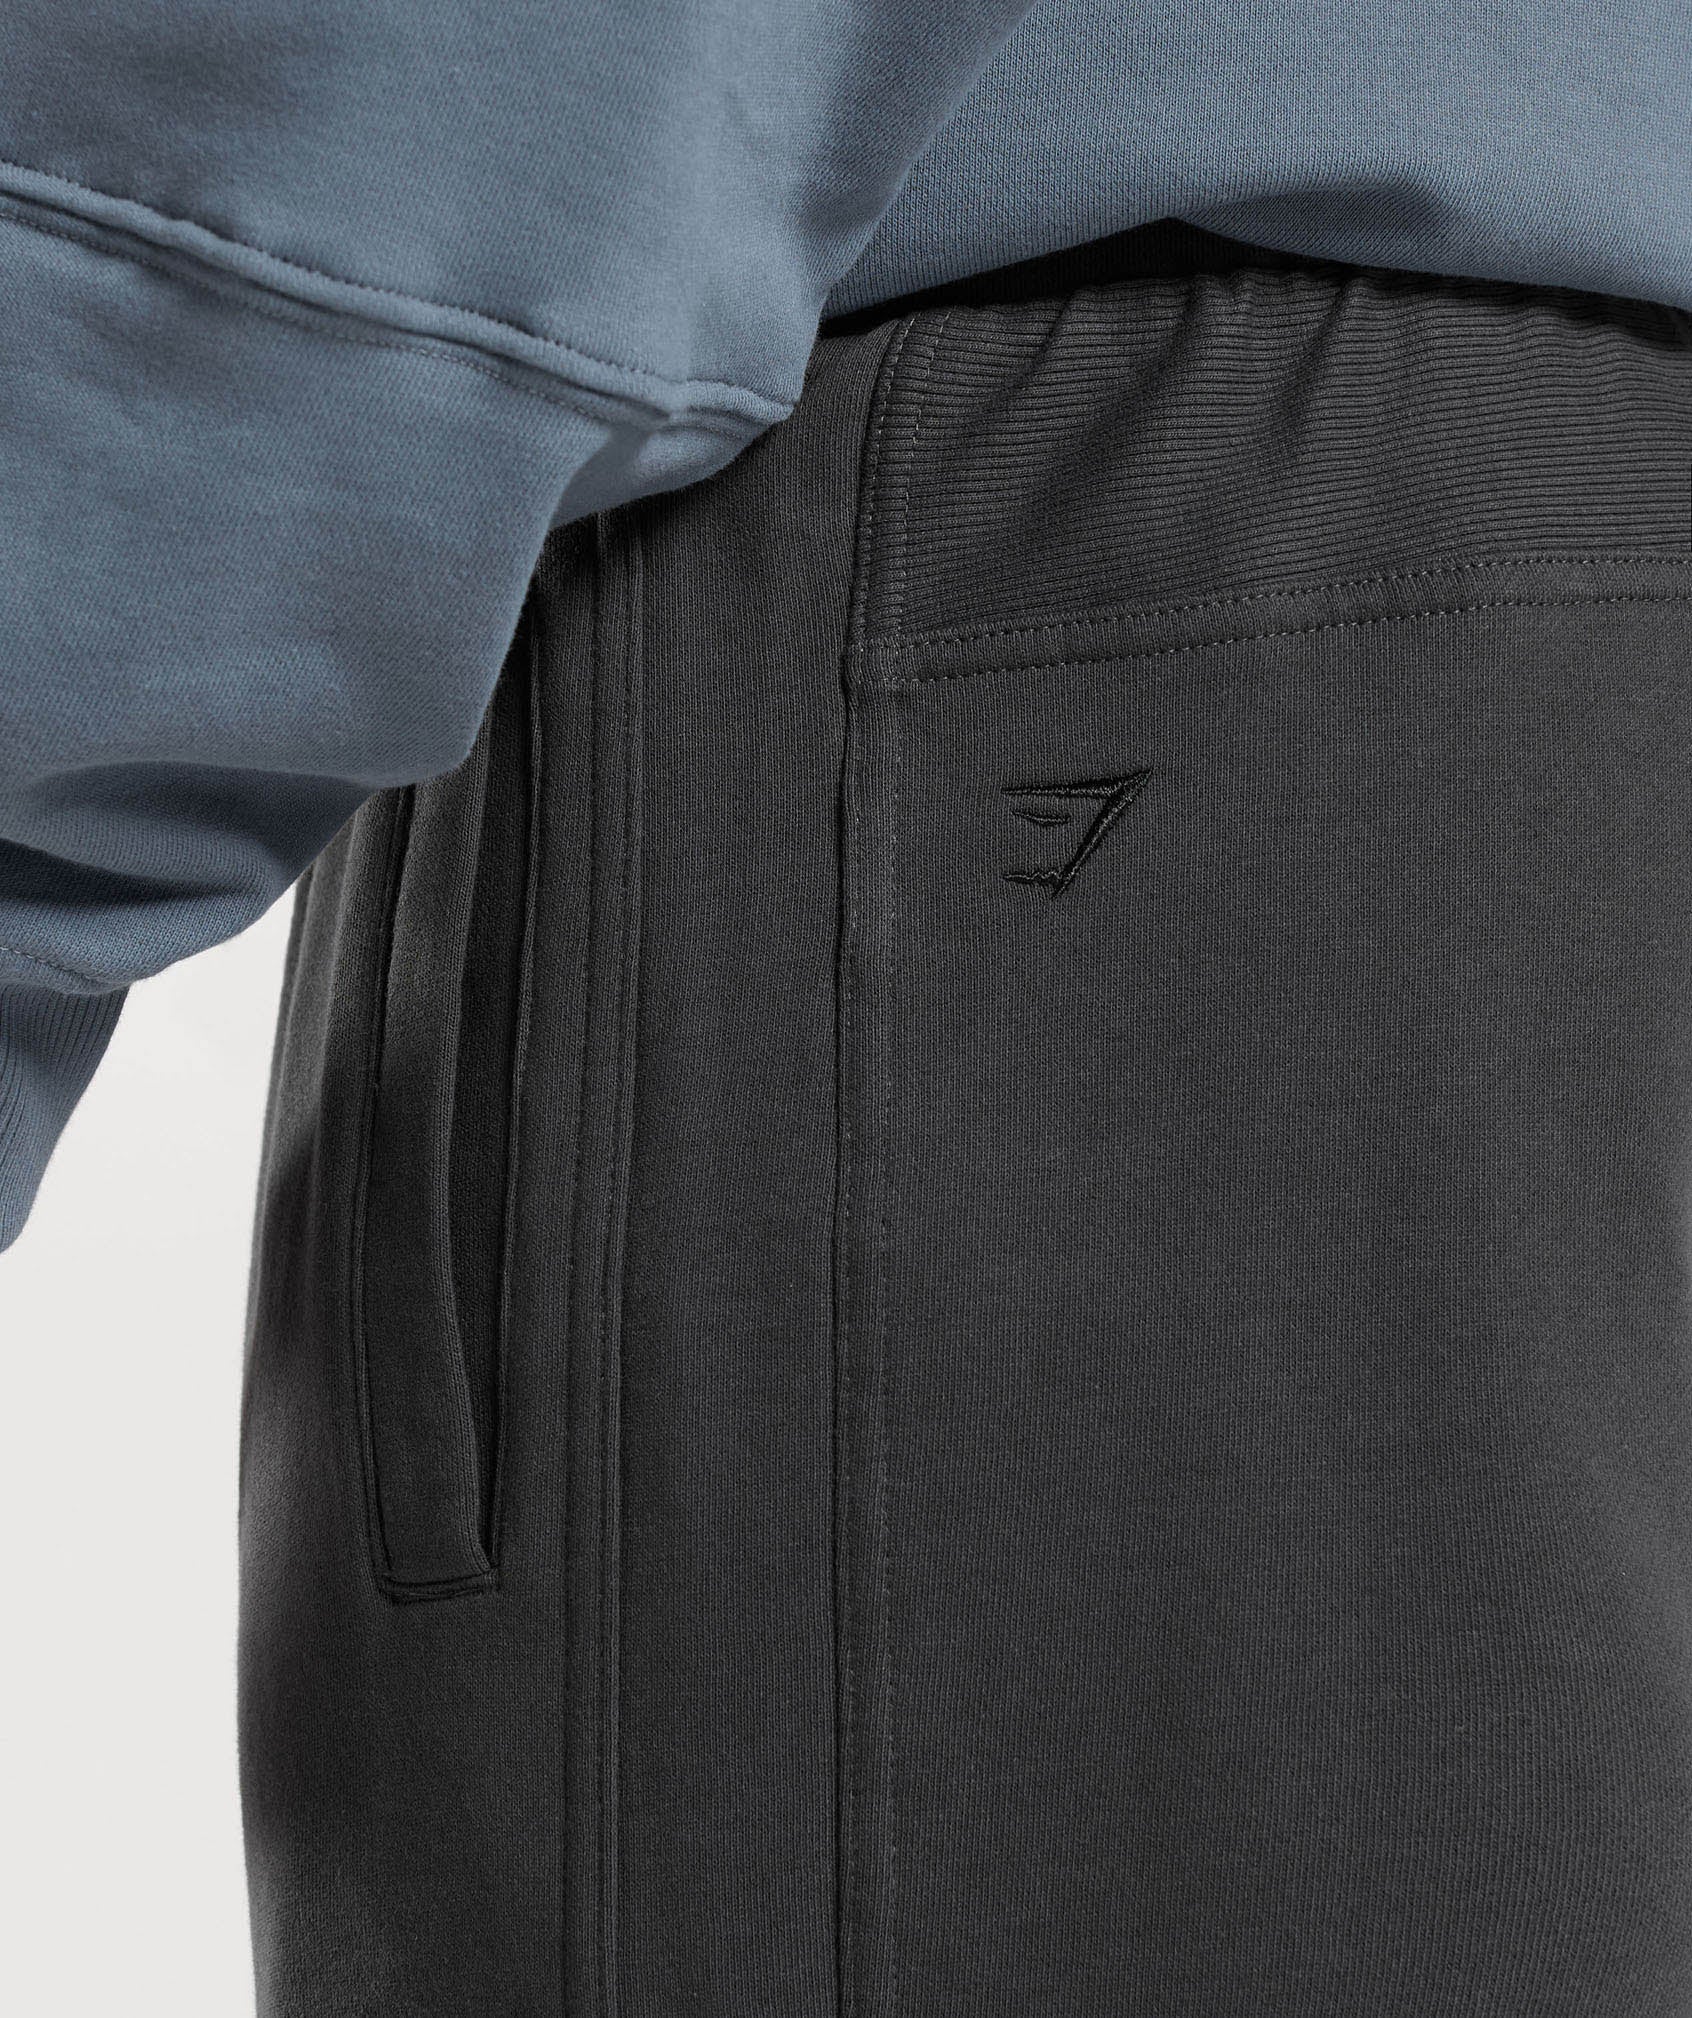 Rest Day Essentials 7" Shorts in Onyx Grey - view 5